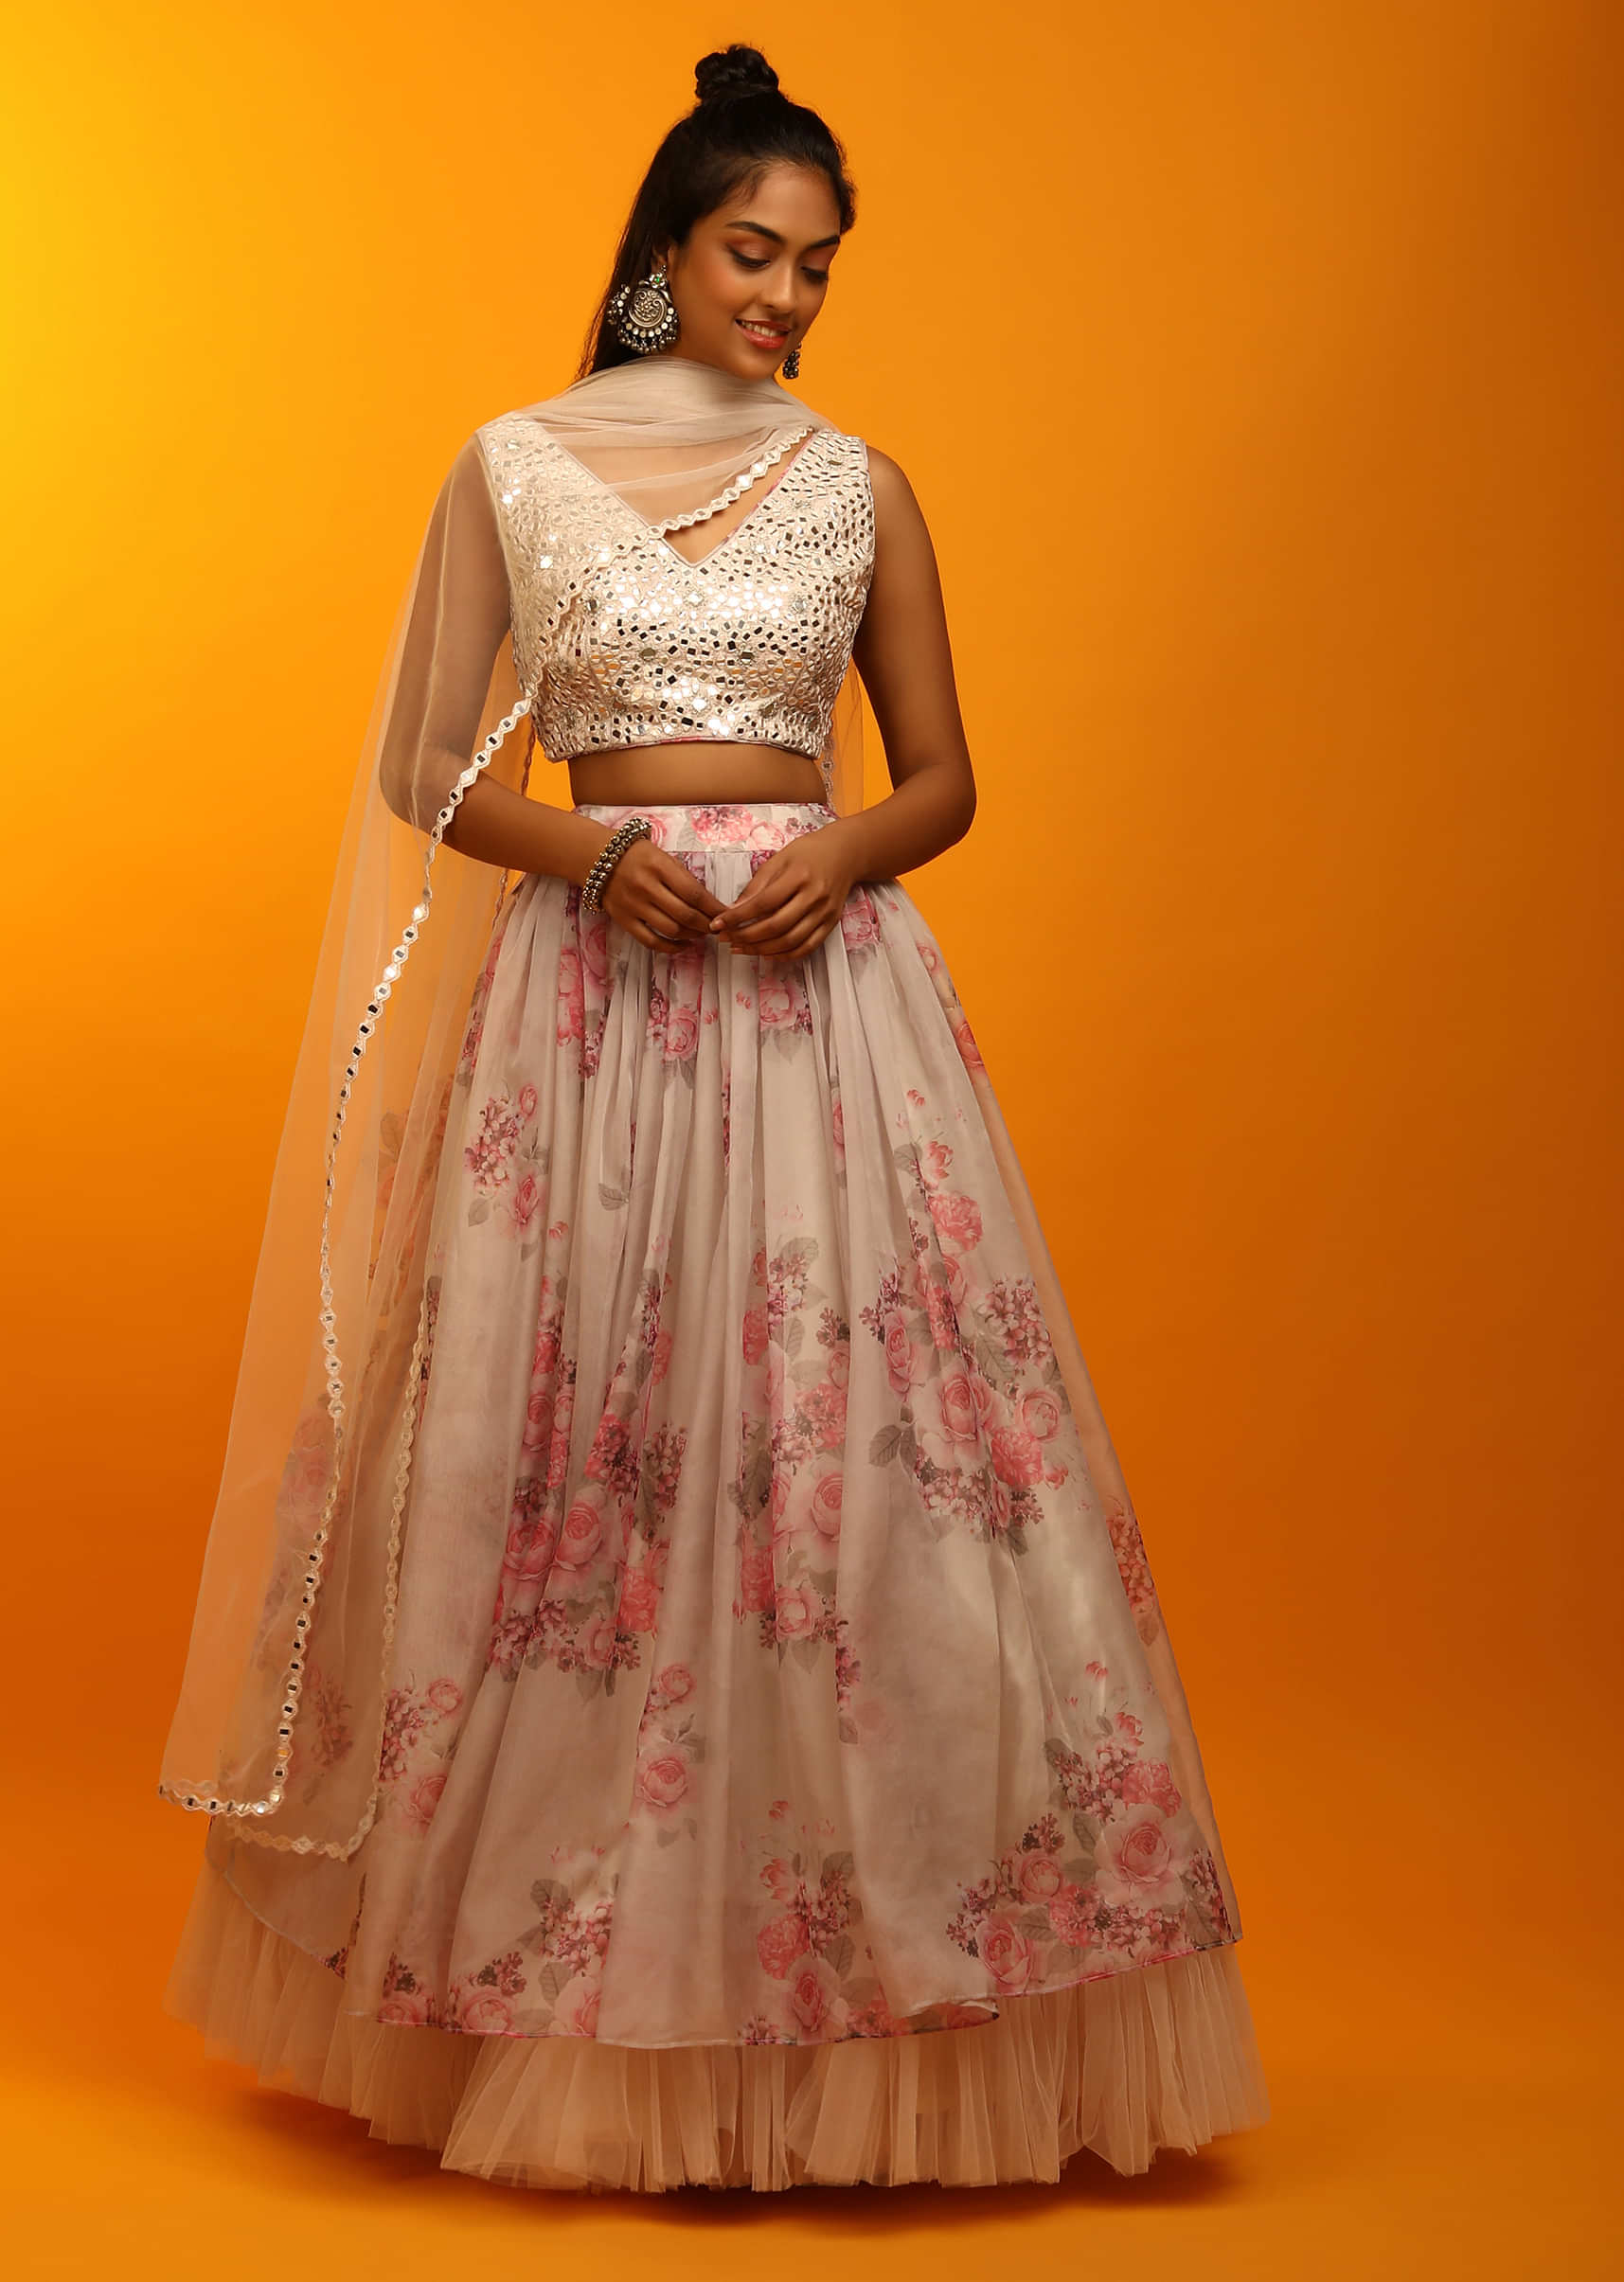 Dew Beige Lehenga In Sheer Organza With Floral Print And Mirror Abla Embroidered Sleeveless Choli